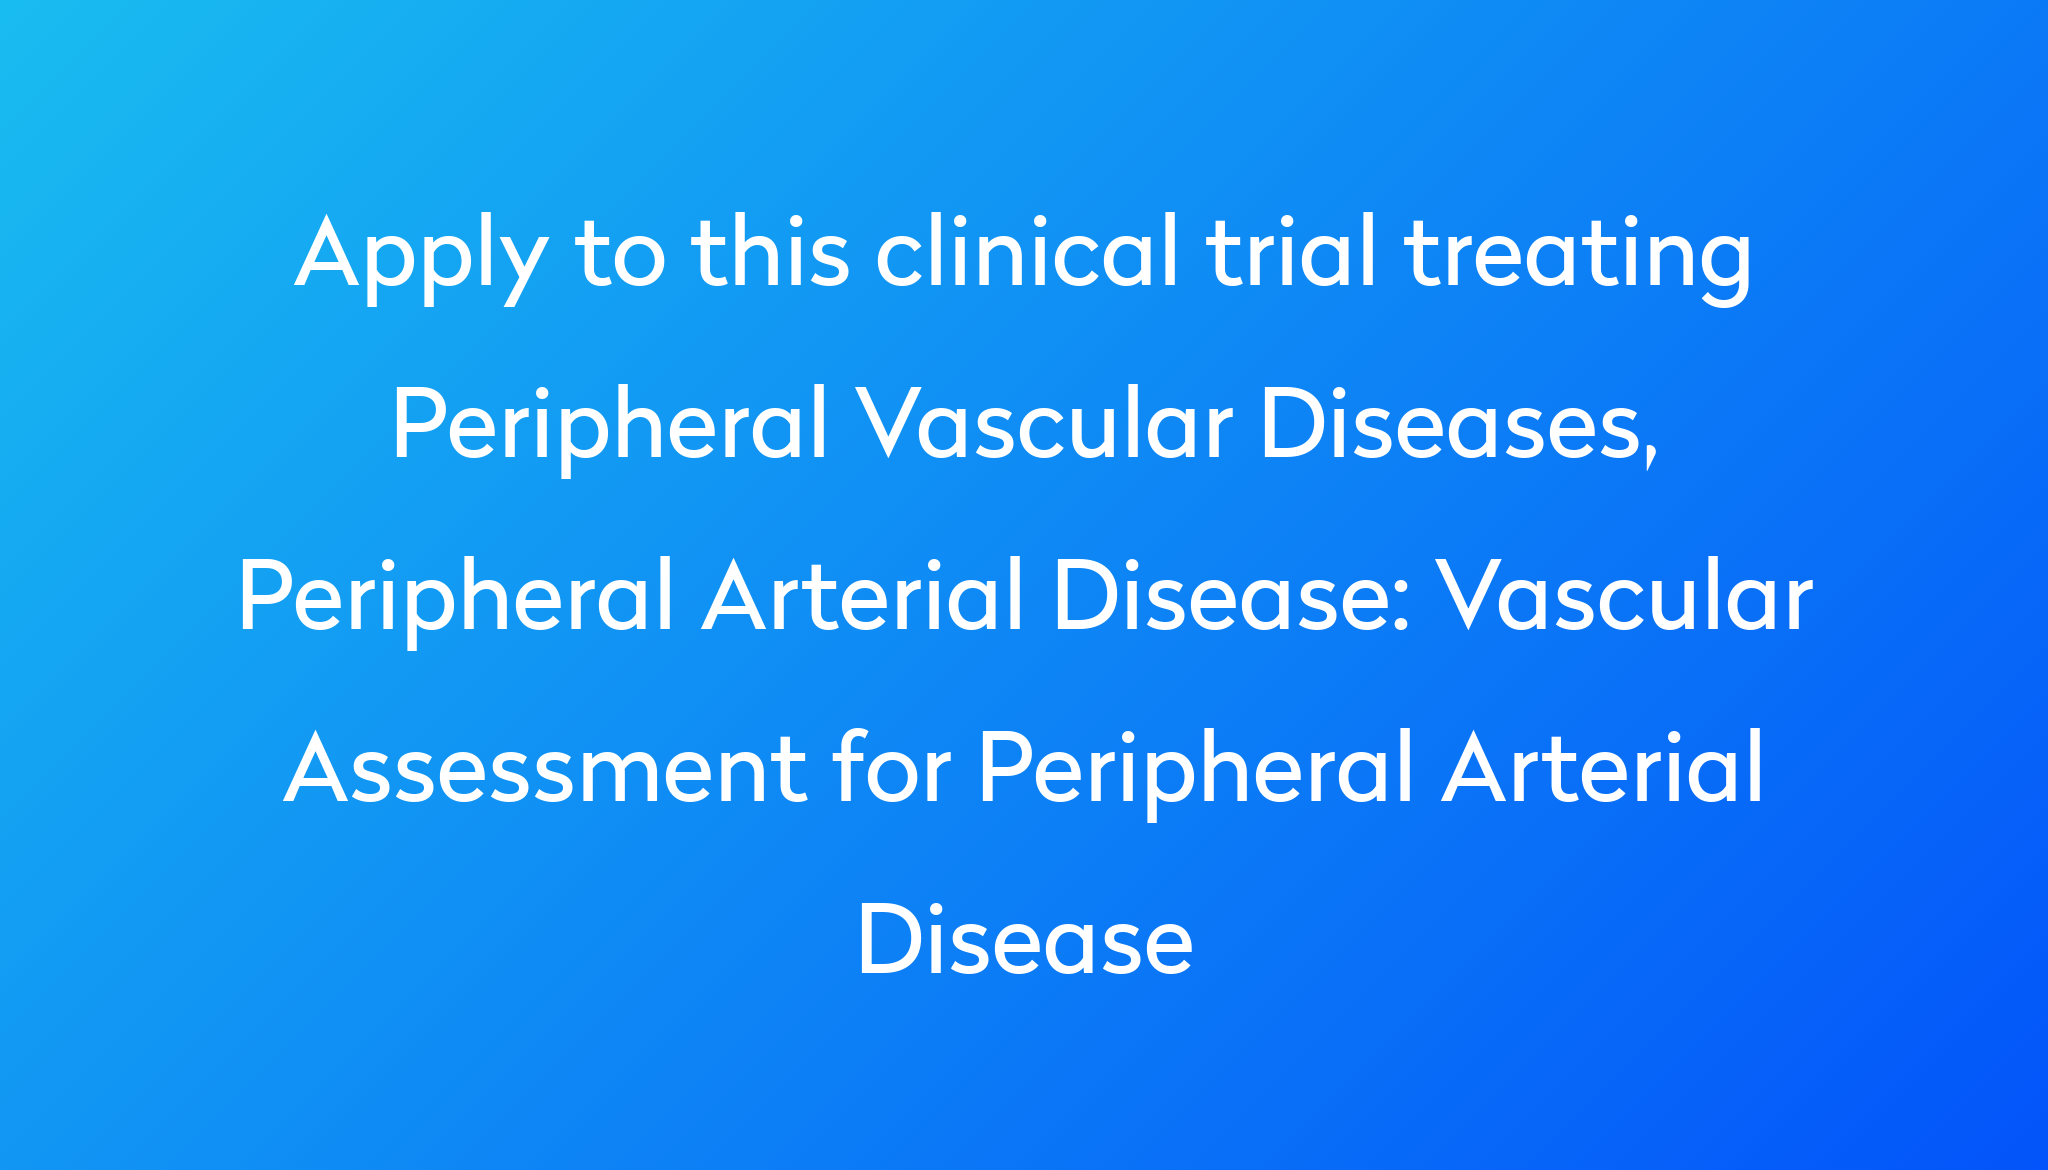 Vascular Assessment For Peripheral Arterial Disease Clinical Trial 2022